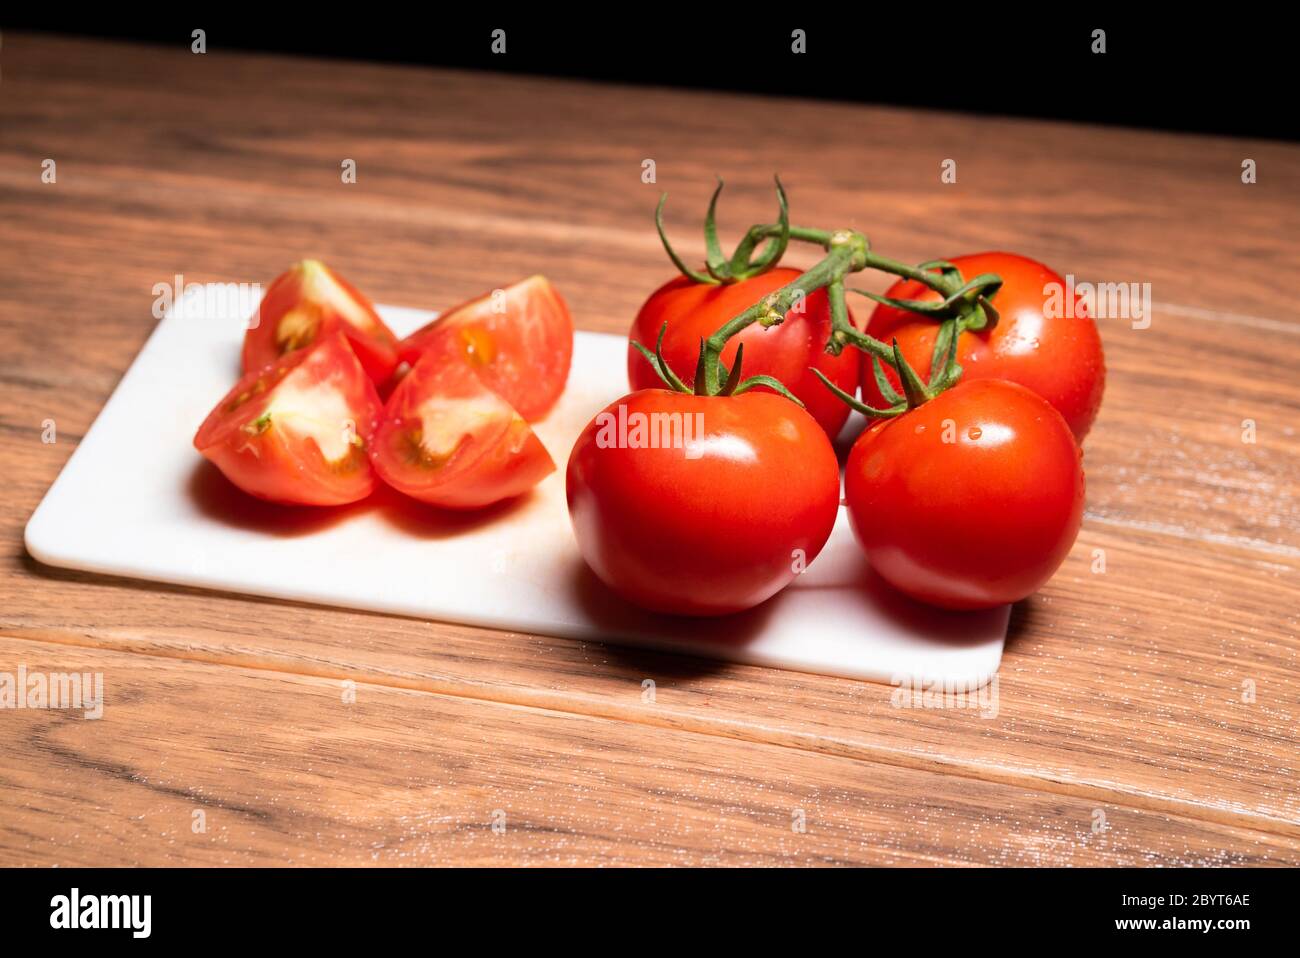 Ripe tomato chopped into four pieces with whole tomatoes on the right side on white chopping board wood background Stock Photo